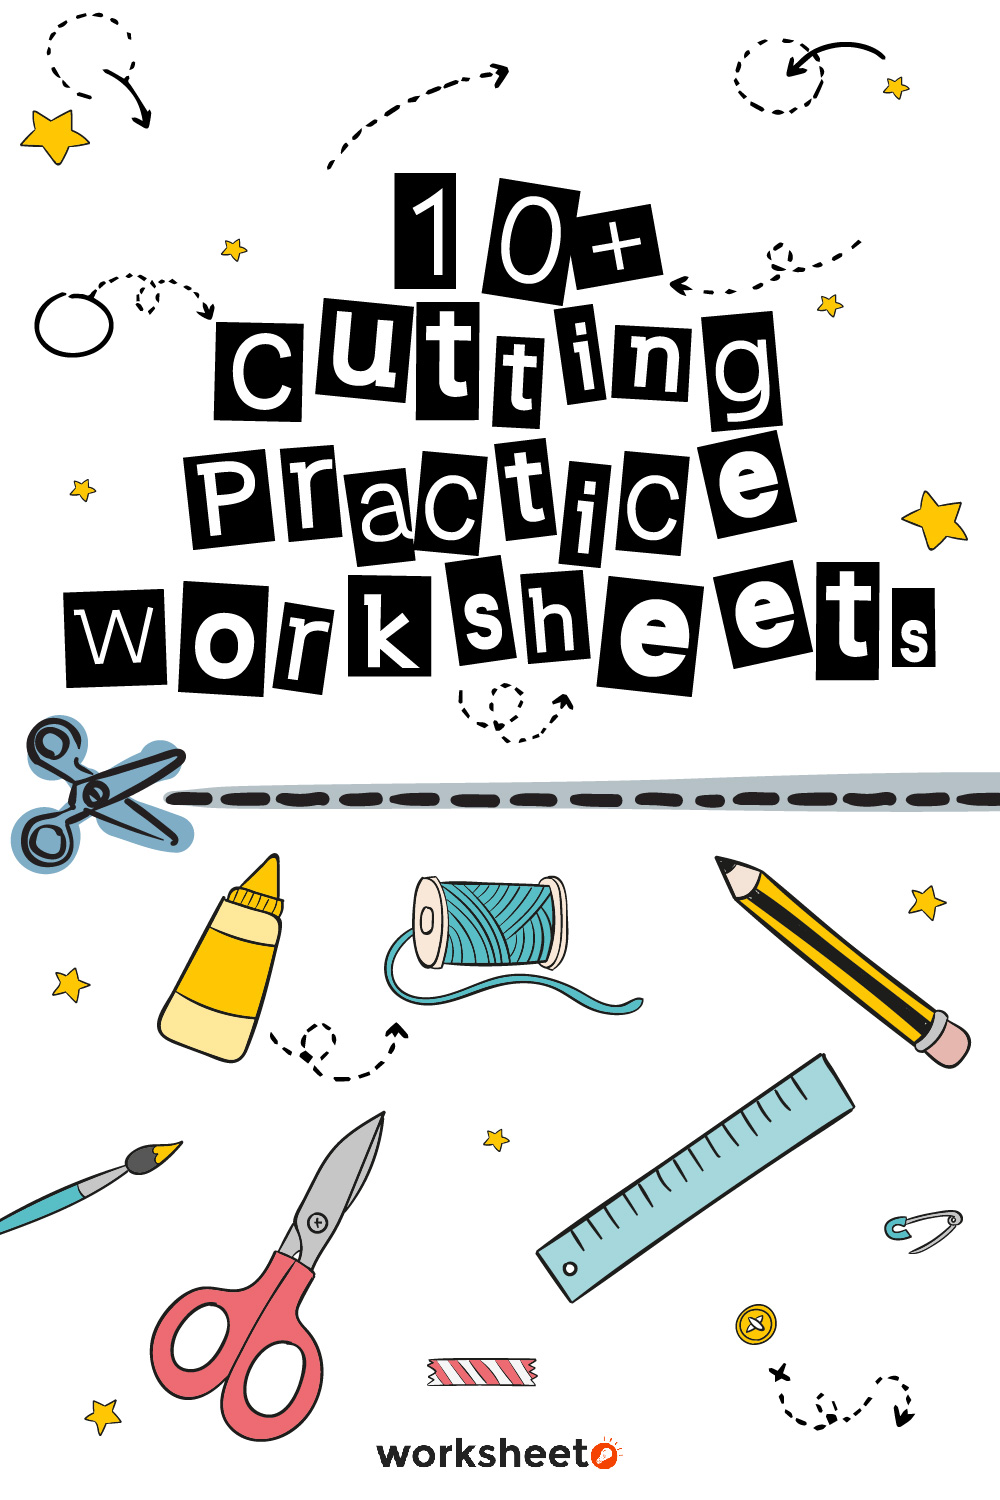 12 Images of Cutting Practice Worksheets